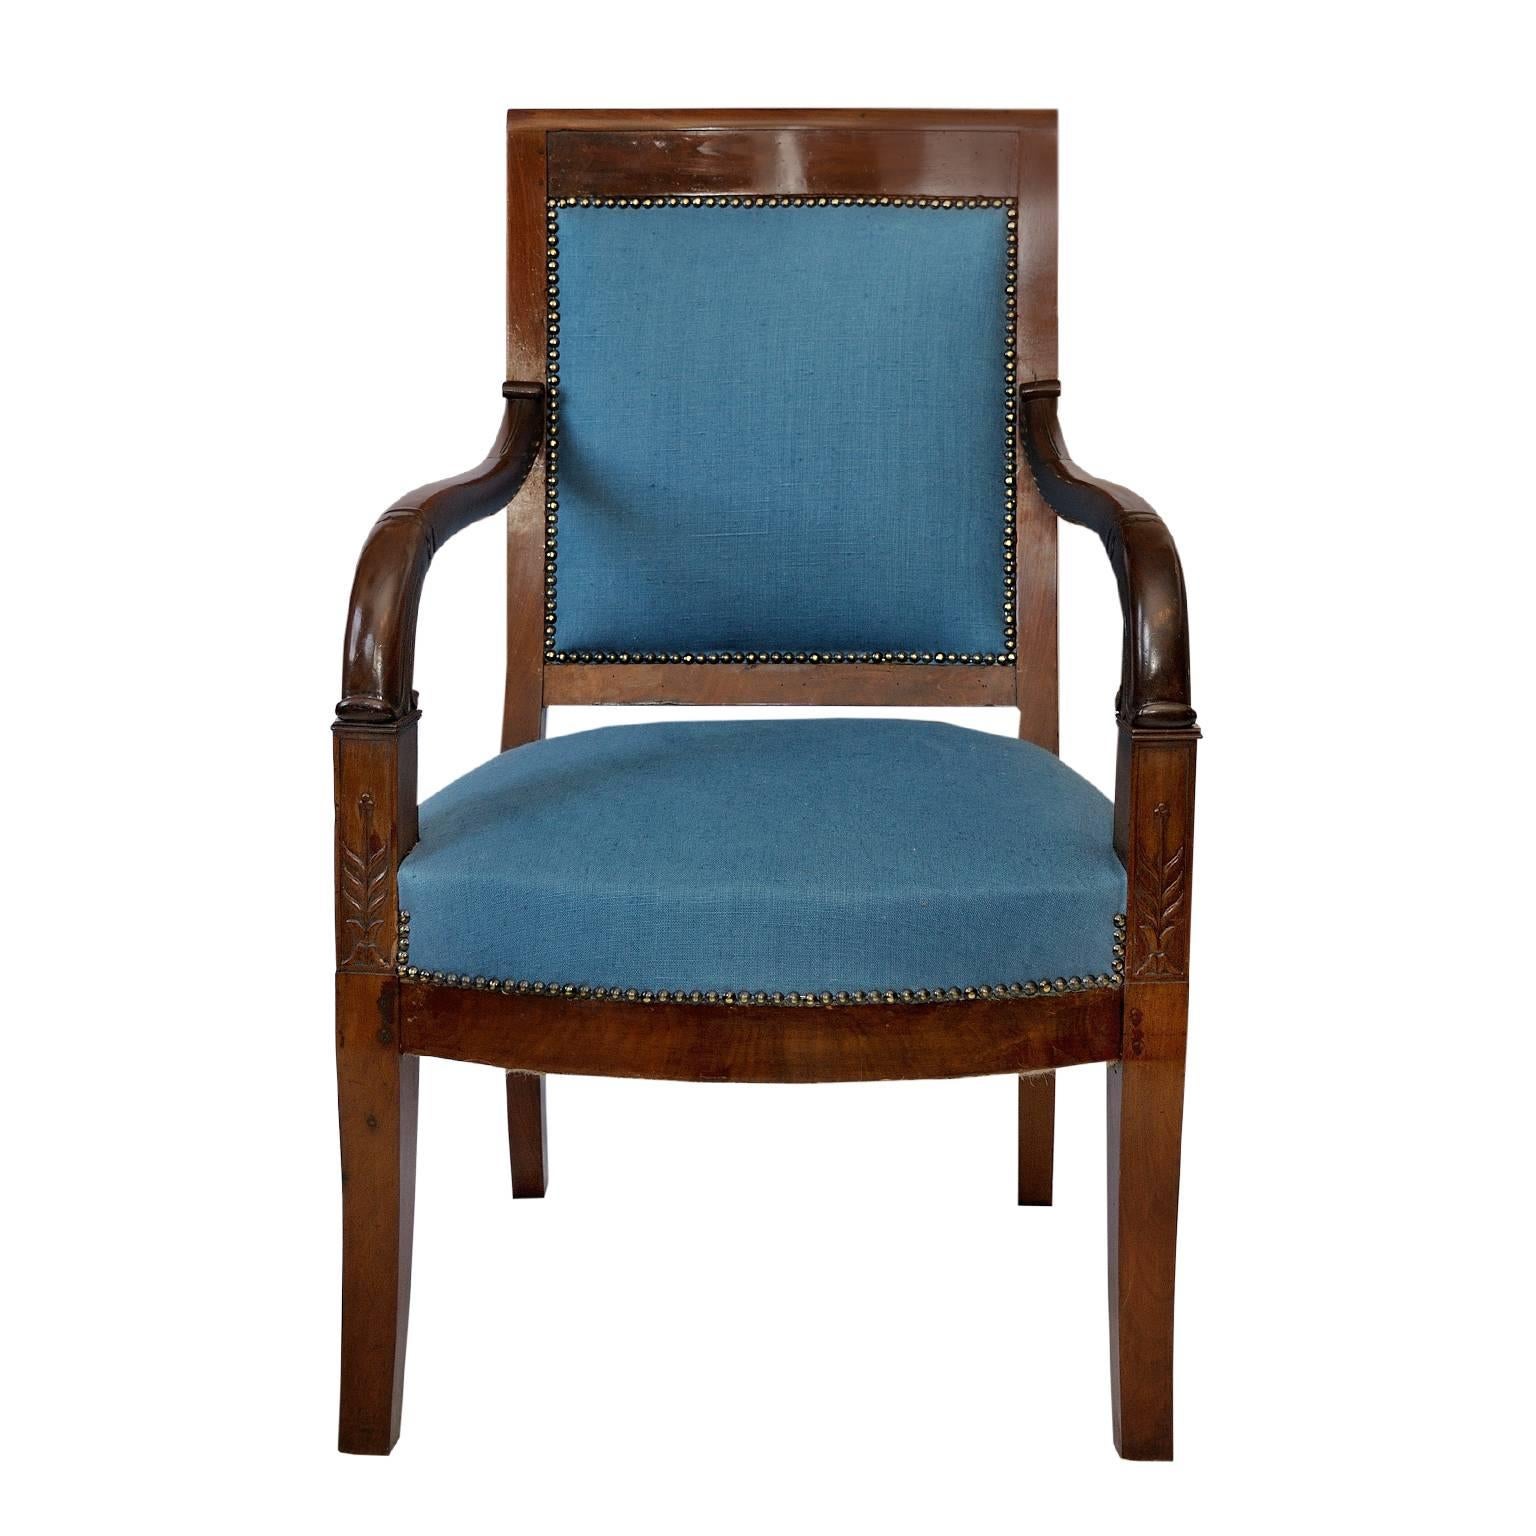 This is a very pleasing and beautifully proportioned French Napoleonic period, early 19th Century Mahogany Open armchair, beautifully upholstered in blue Scottish Linen, circa 1820.